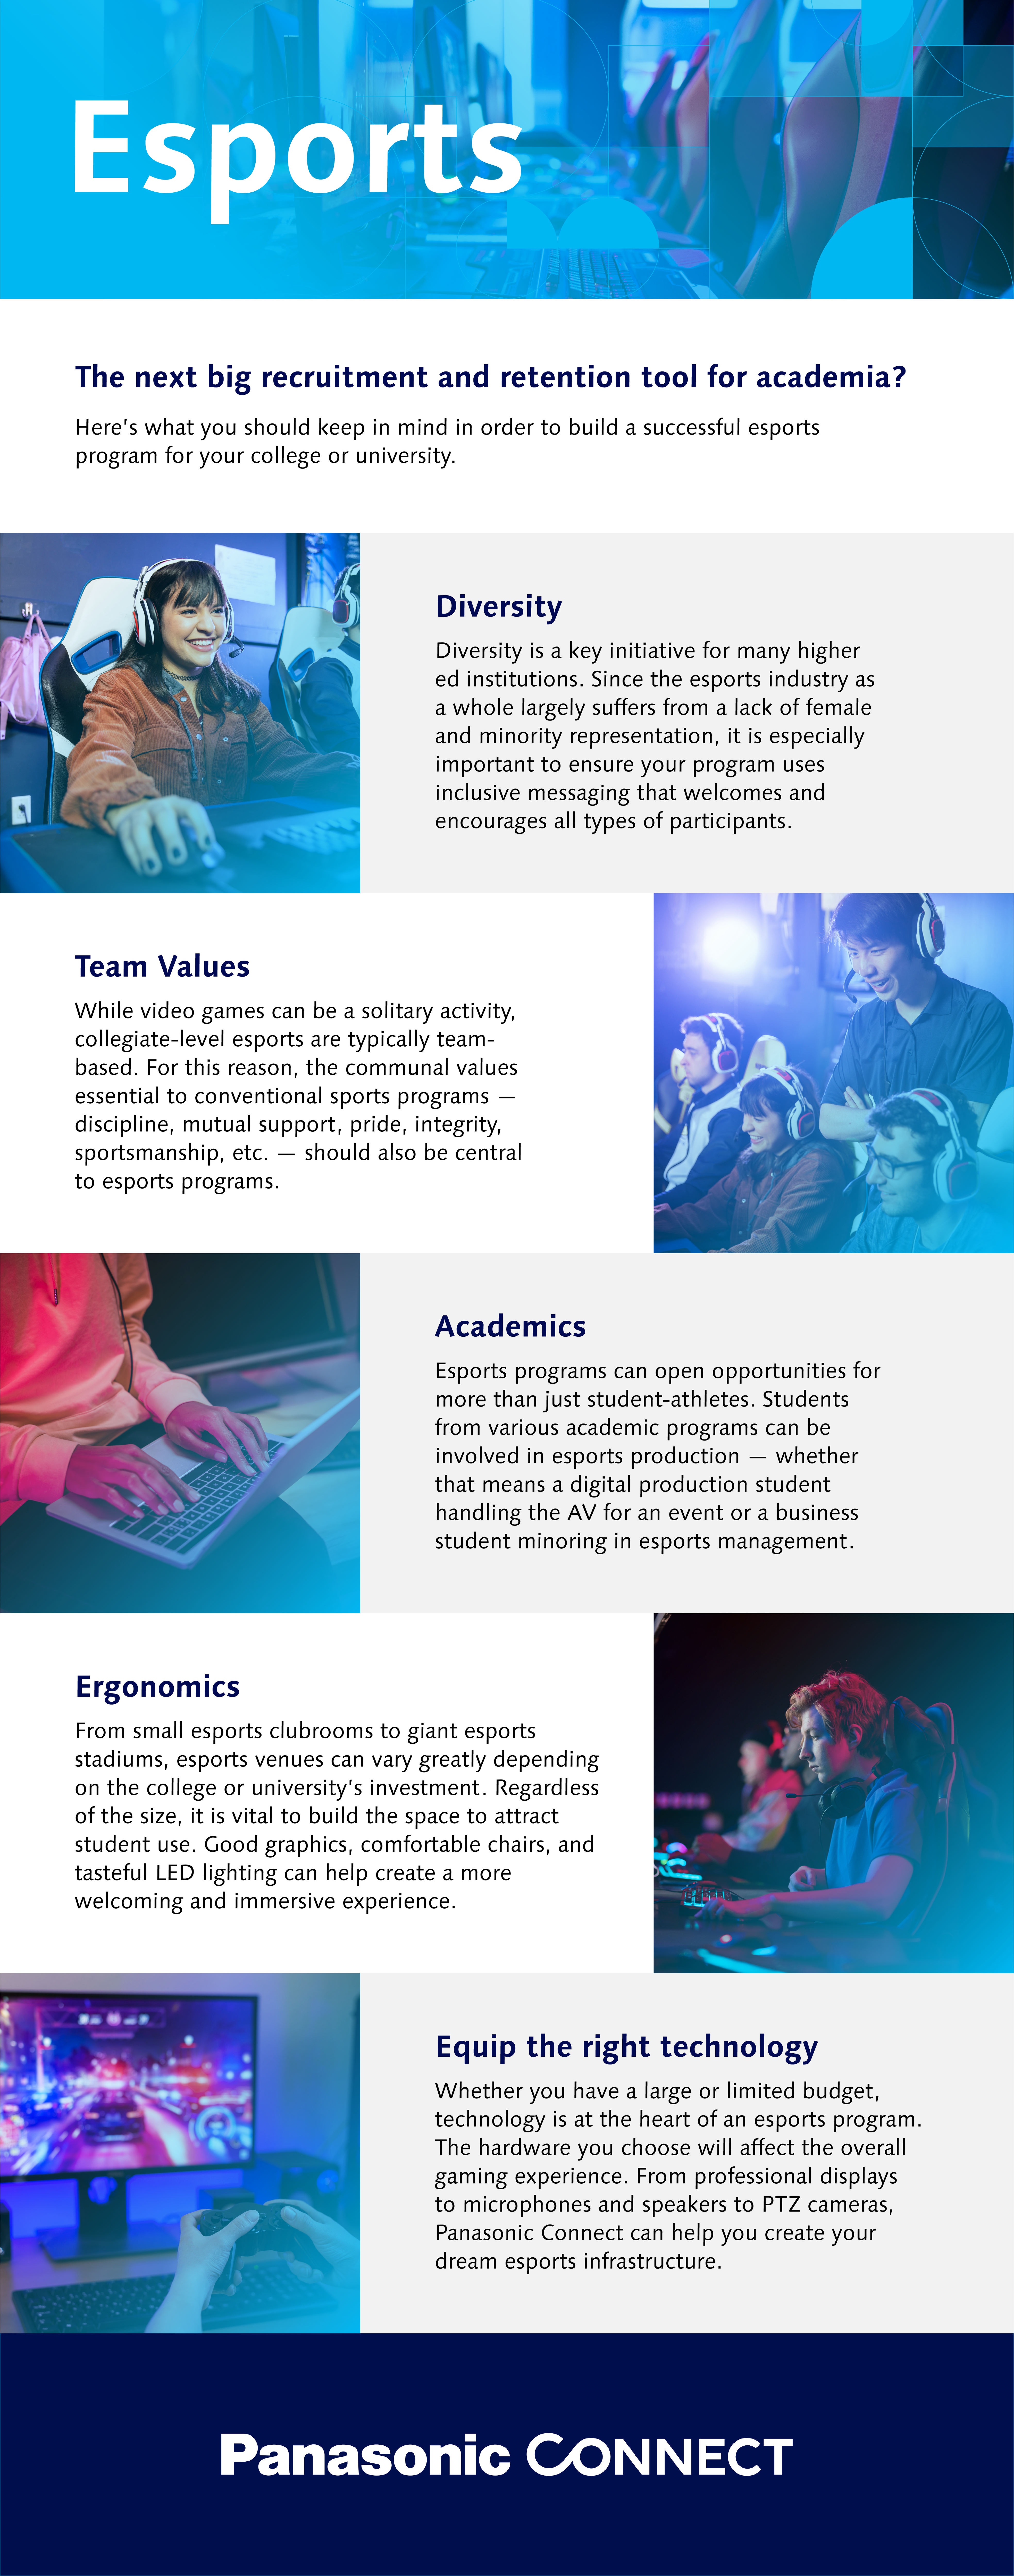 Panasonic_Building a Successful Esports Program_Templated Infographic_v3_092222-01.png